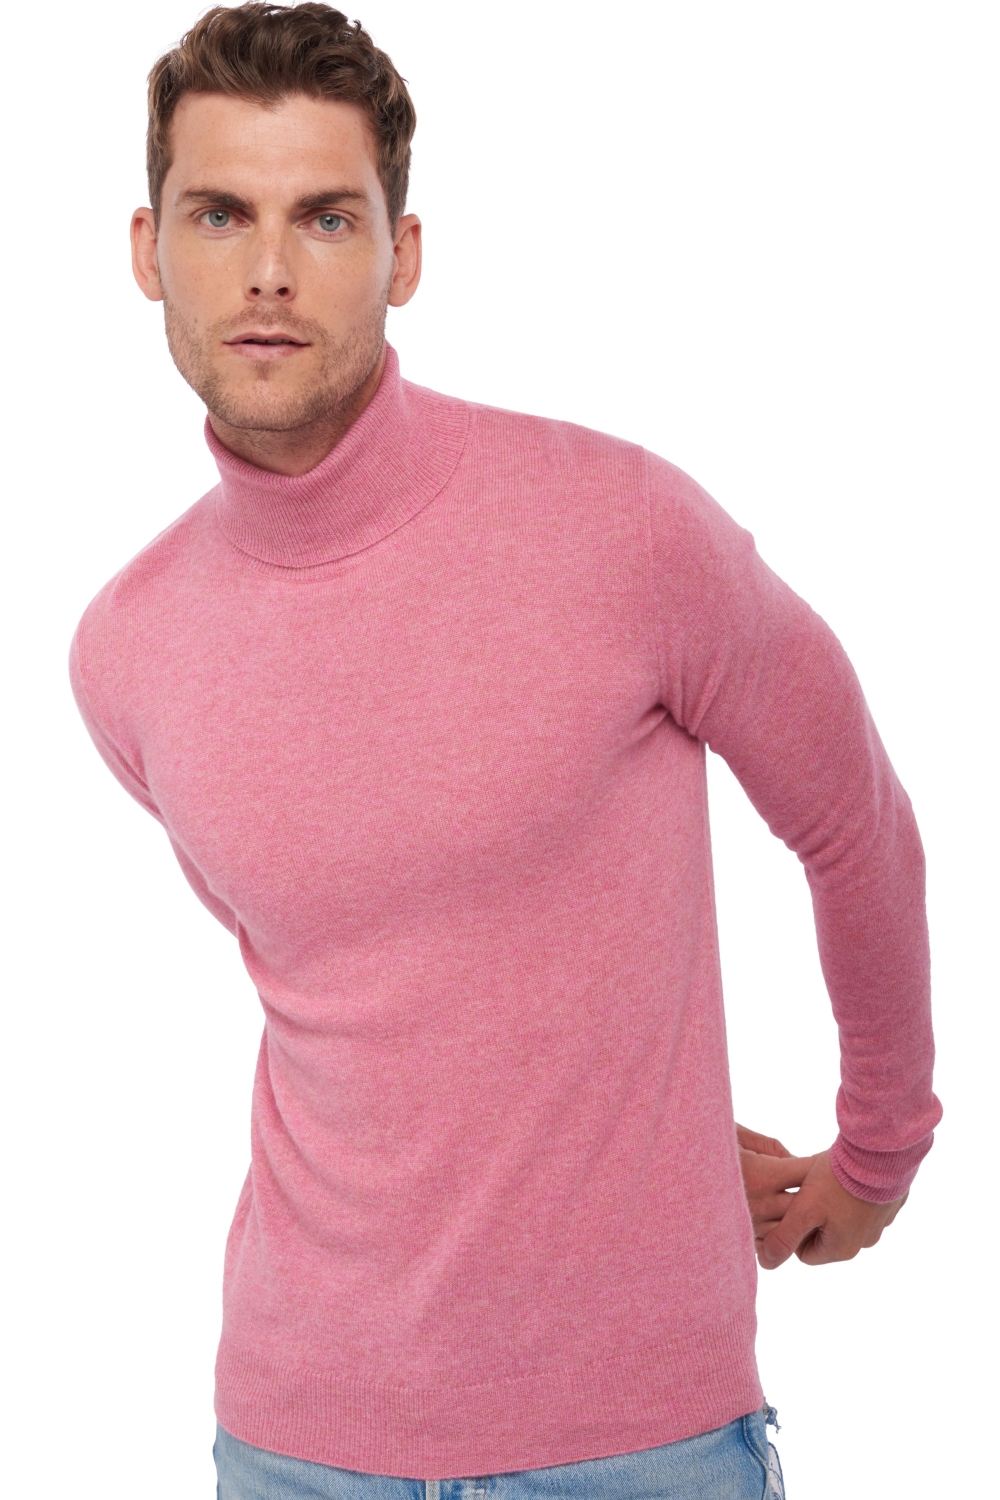 Cashmere men basic sweaters at low prices tarry first carnation pink xl